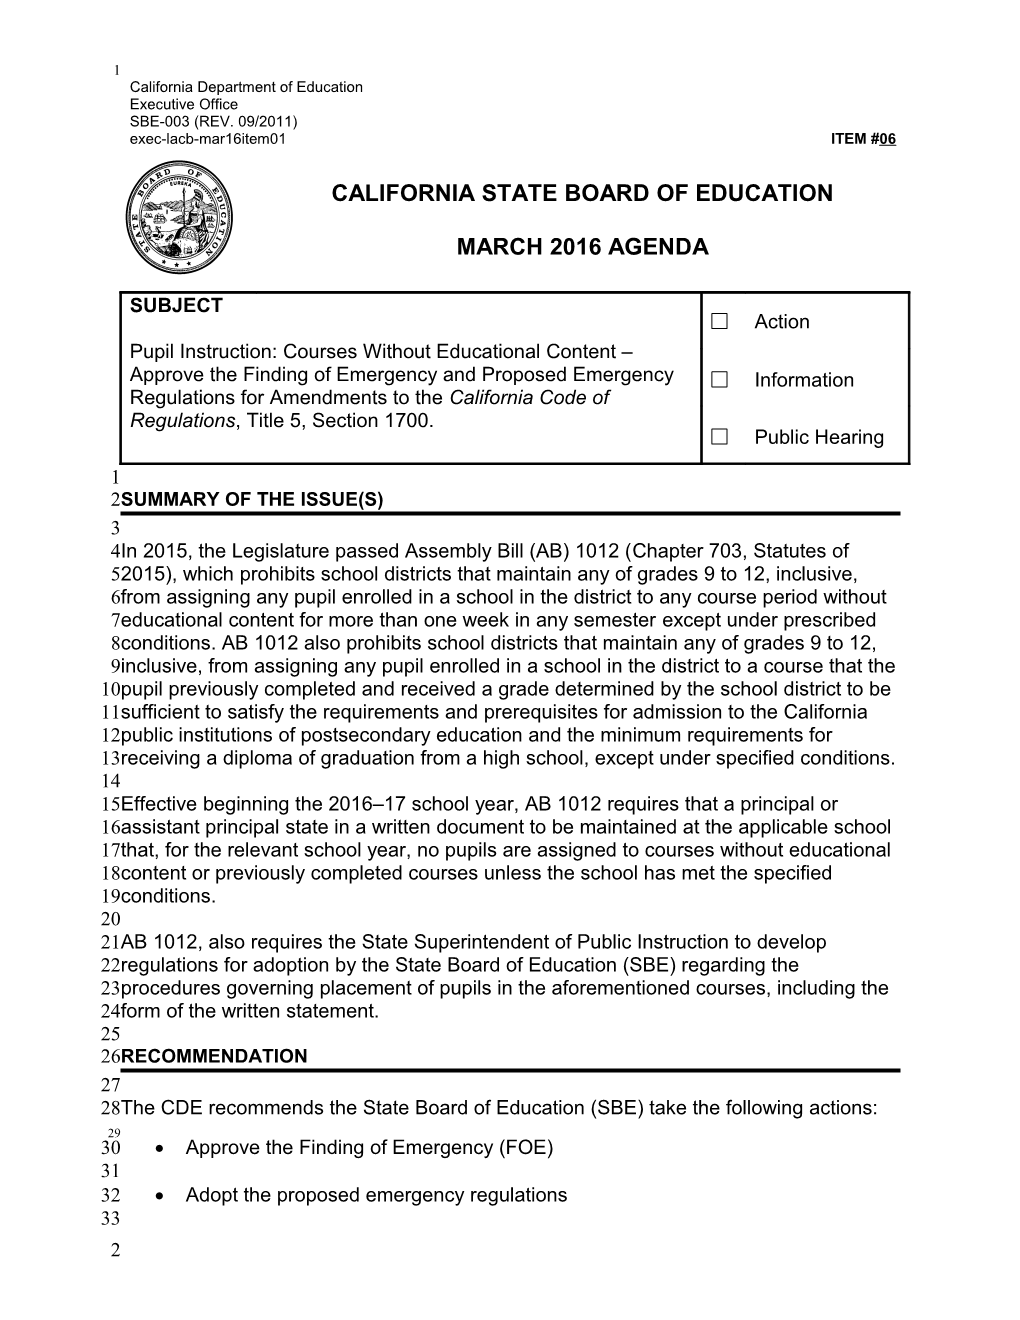 March 2016 Agenda Item 06 - Meeting Agendas (CA State Board of Education)